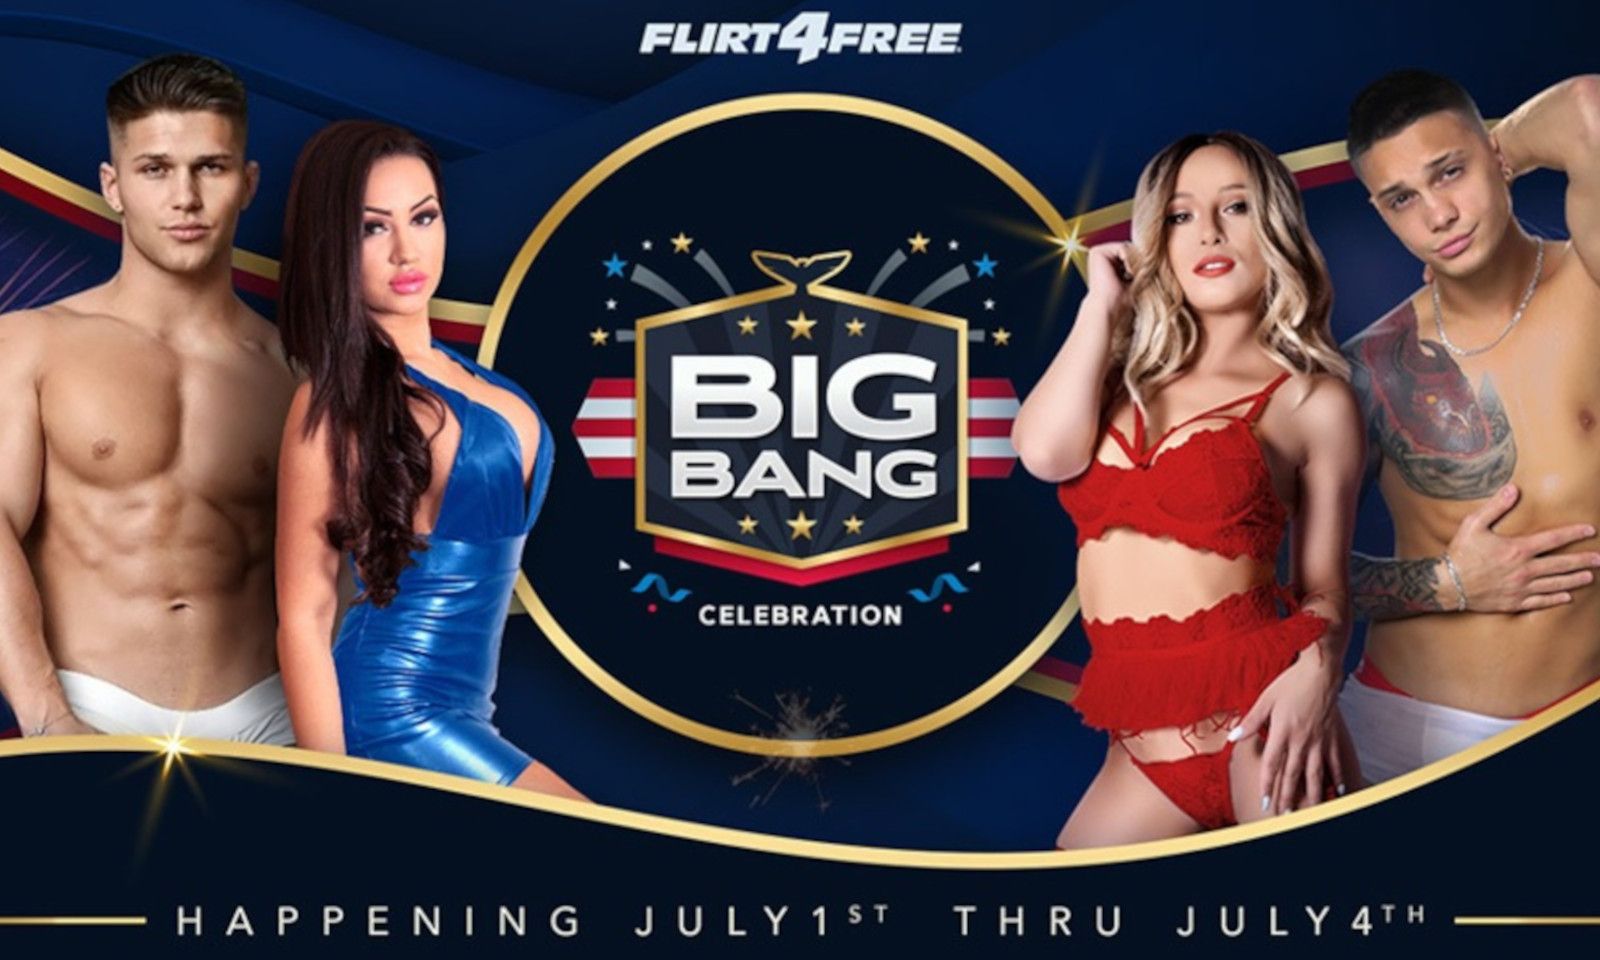 Flirt4Free Launches 'The Big Bang' Fourth of July Promotion